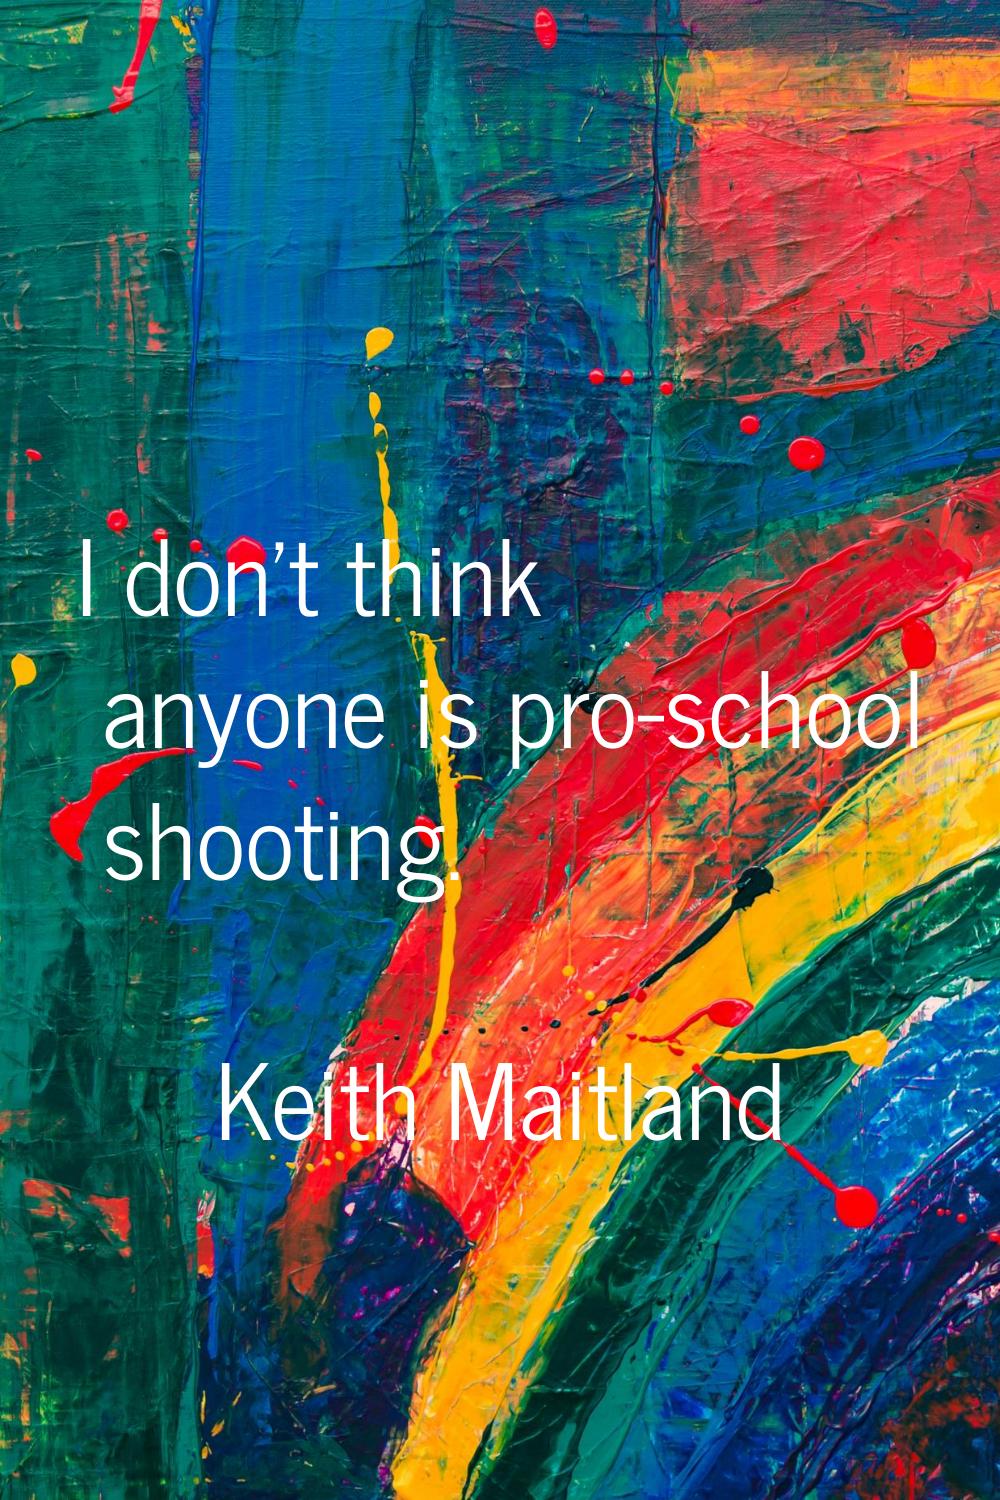 I don't think anyone is pro-school shooting.